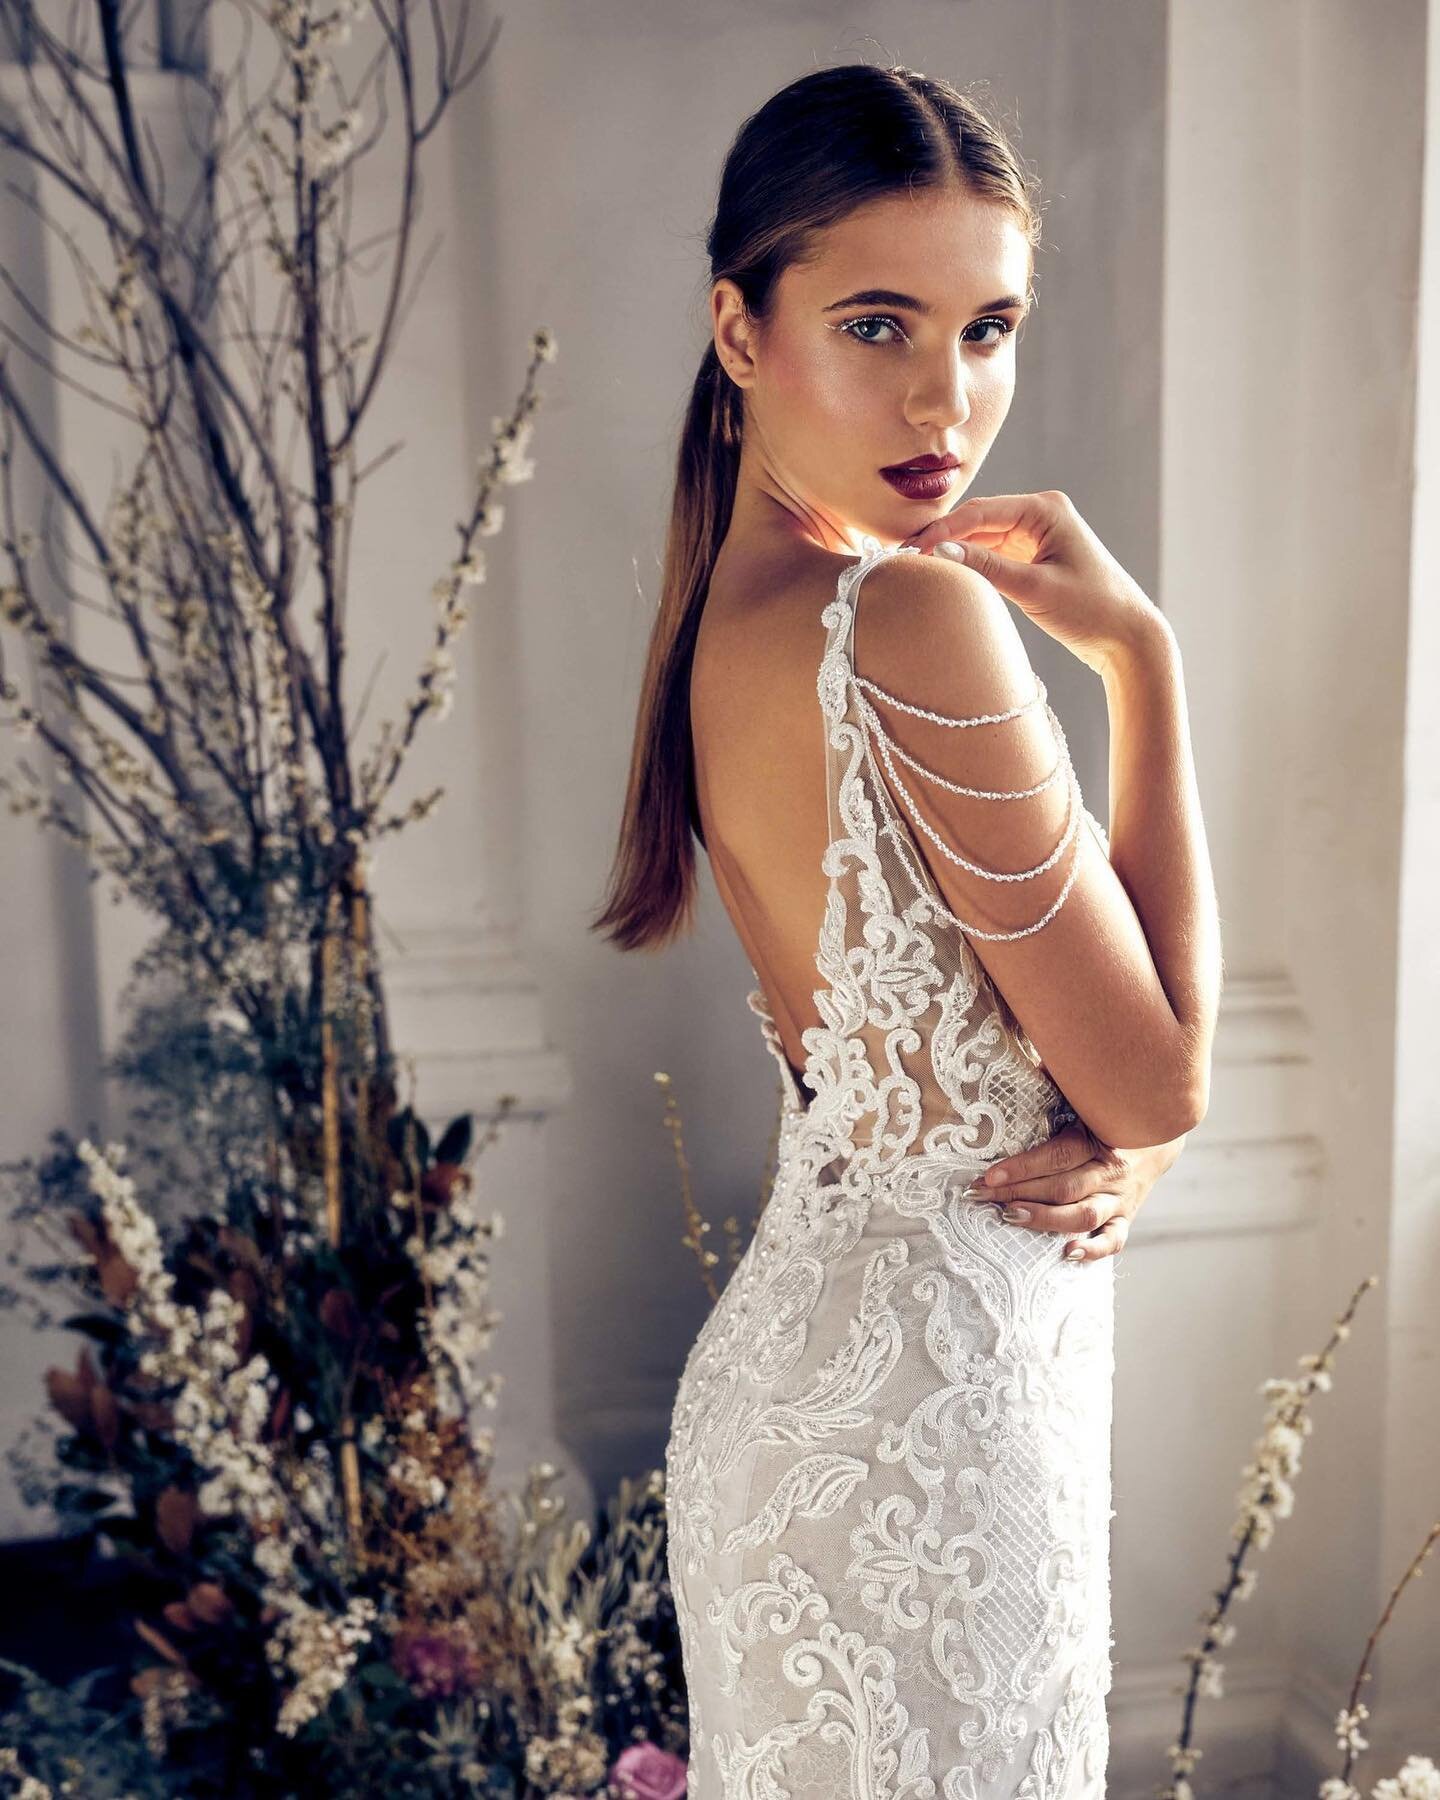 Wedding Dresses Perth - Bridal Gowns | The Complete Bridal